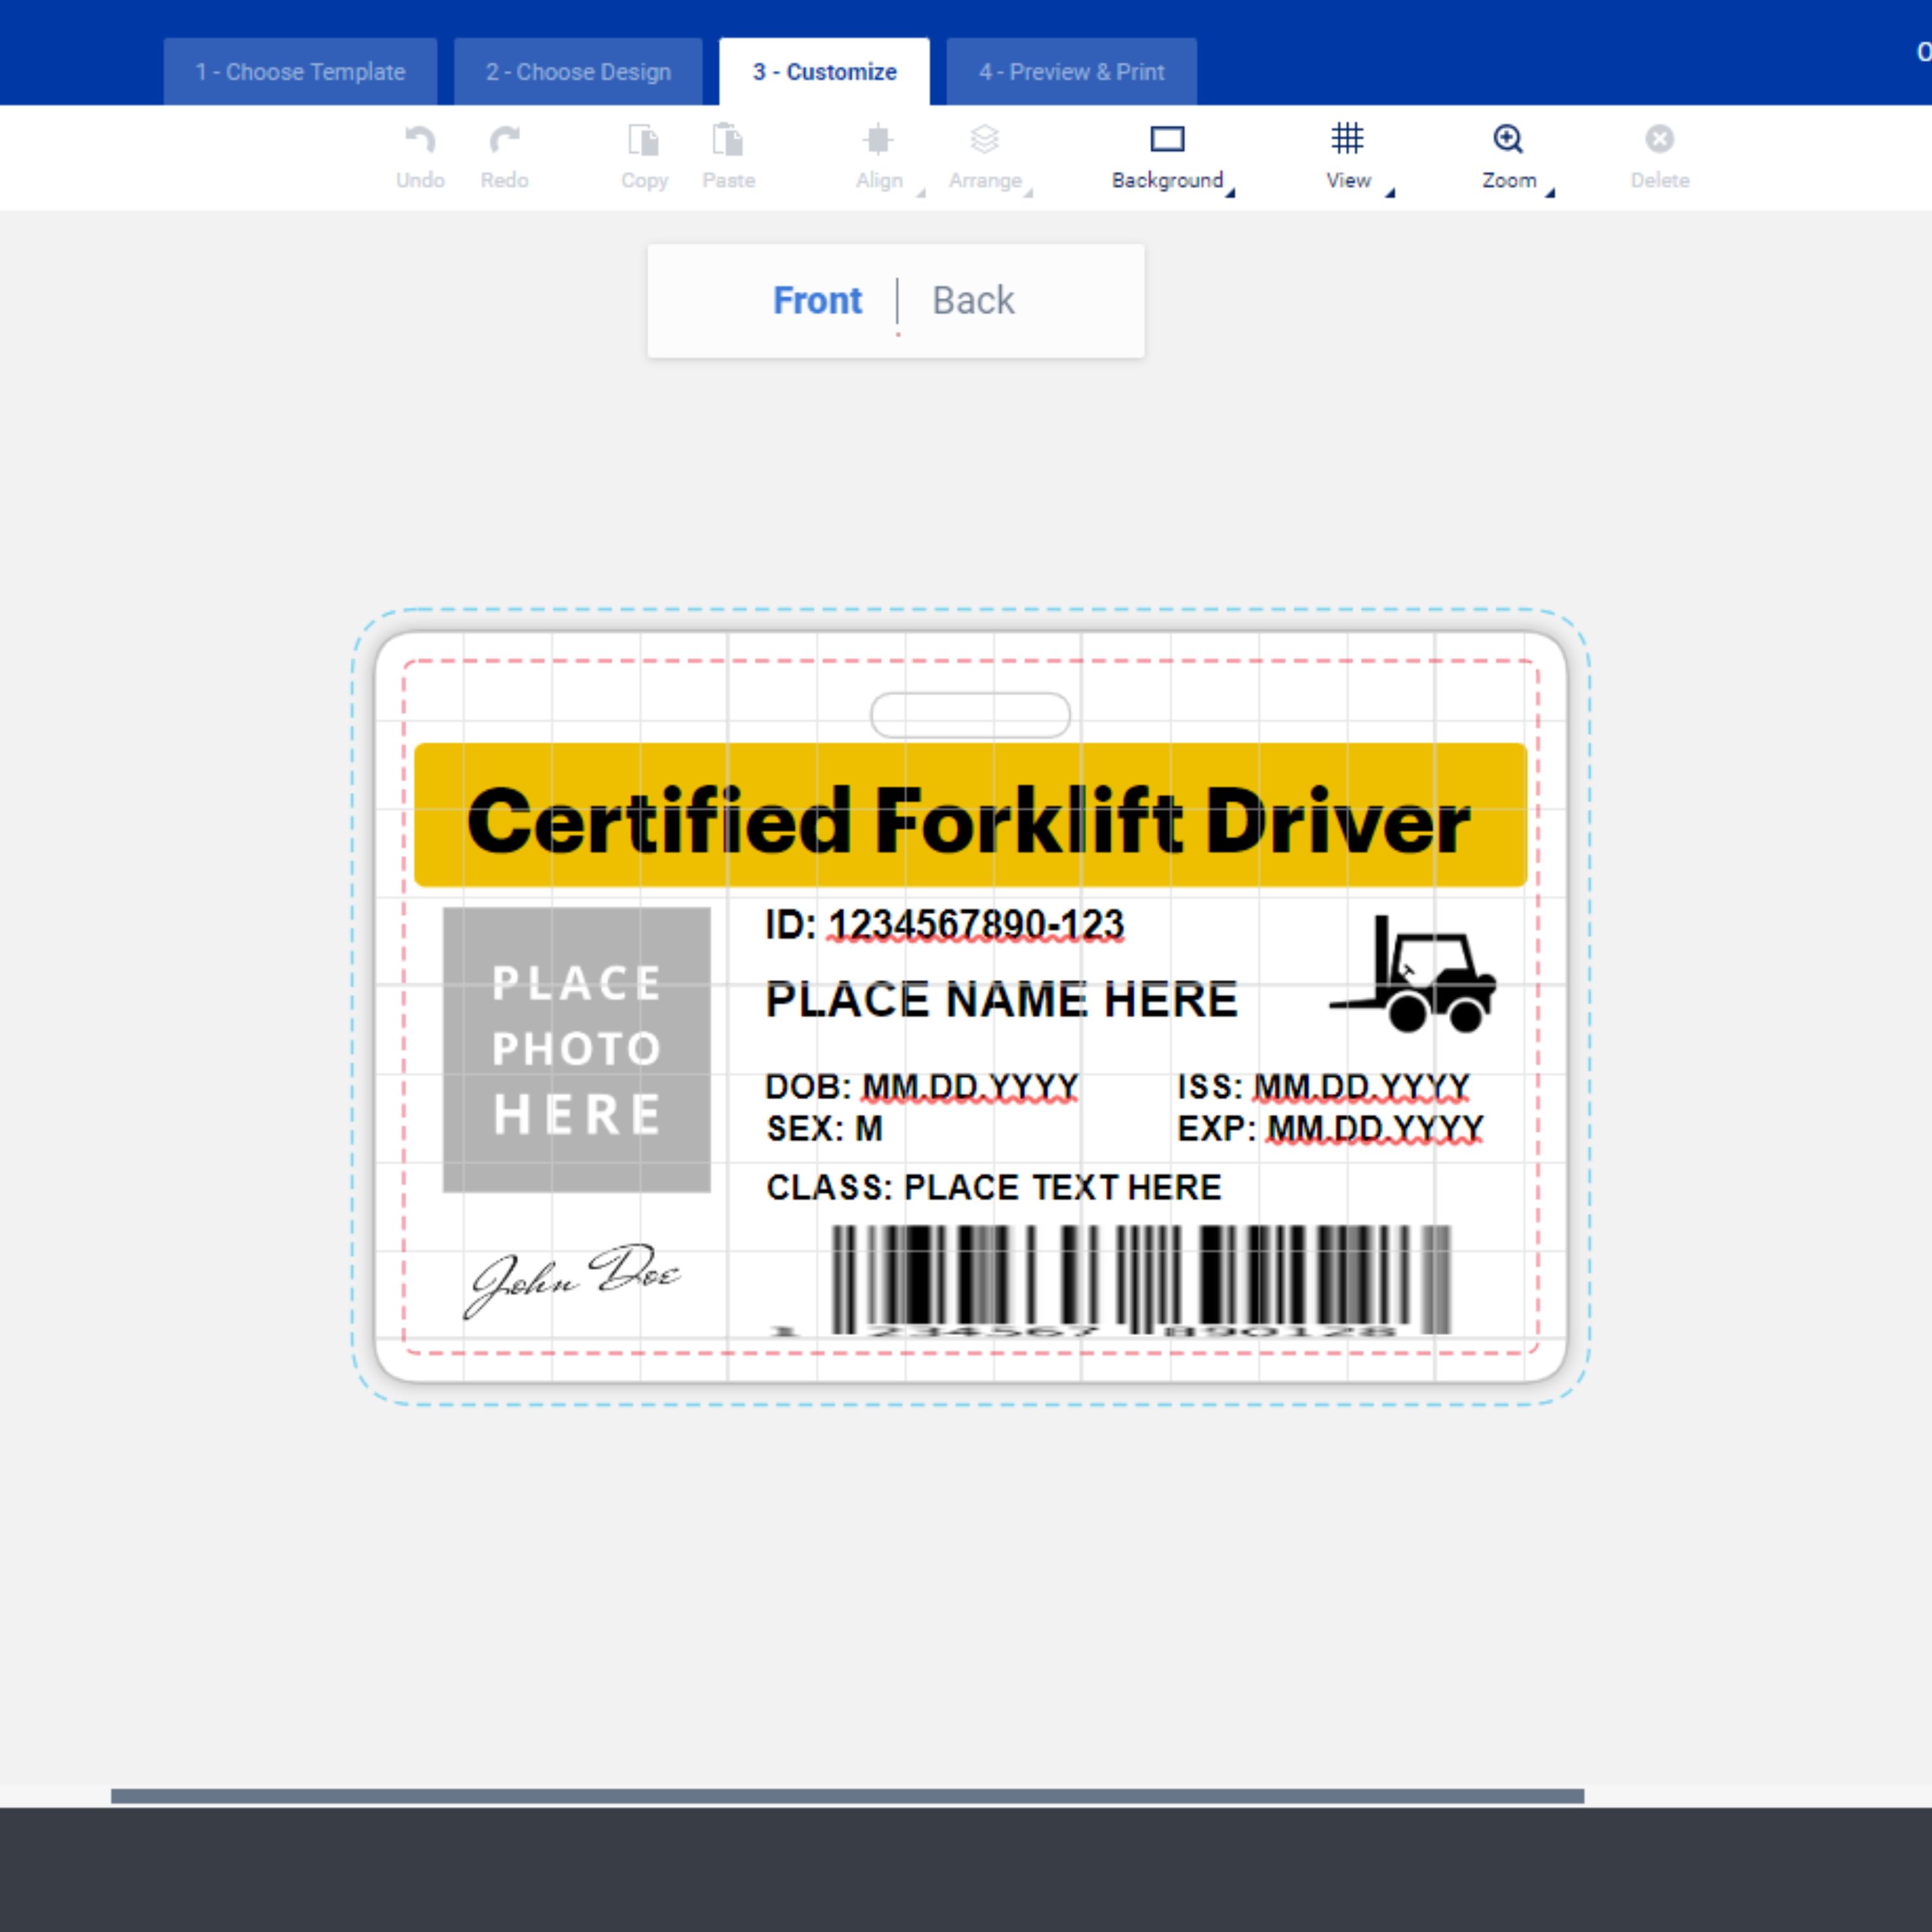 Free Avery template for a certified forklift driver employee ID badge. The image is a screenshot of Avery Design and Print Online showing the template in the editor screen.